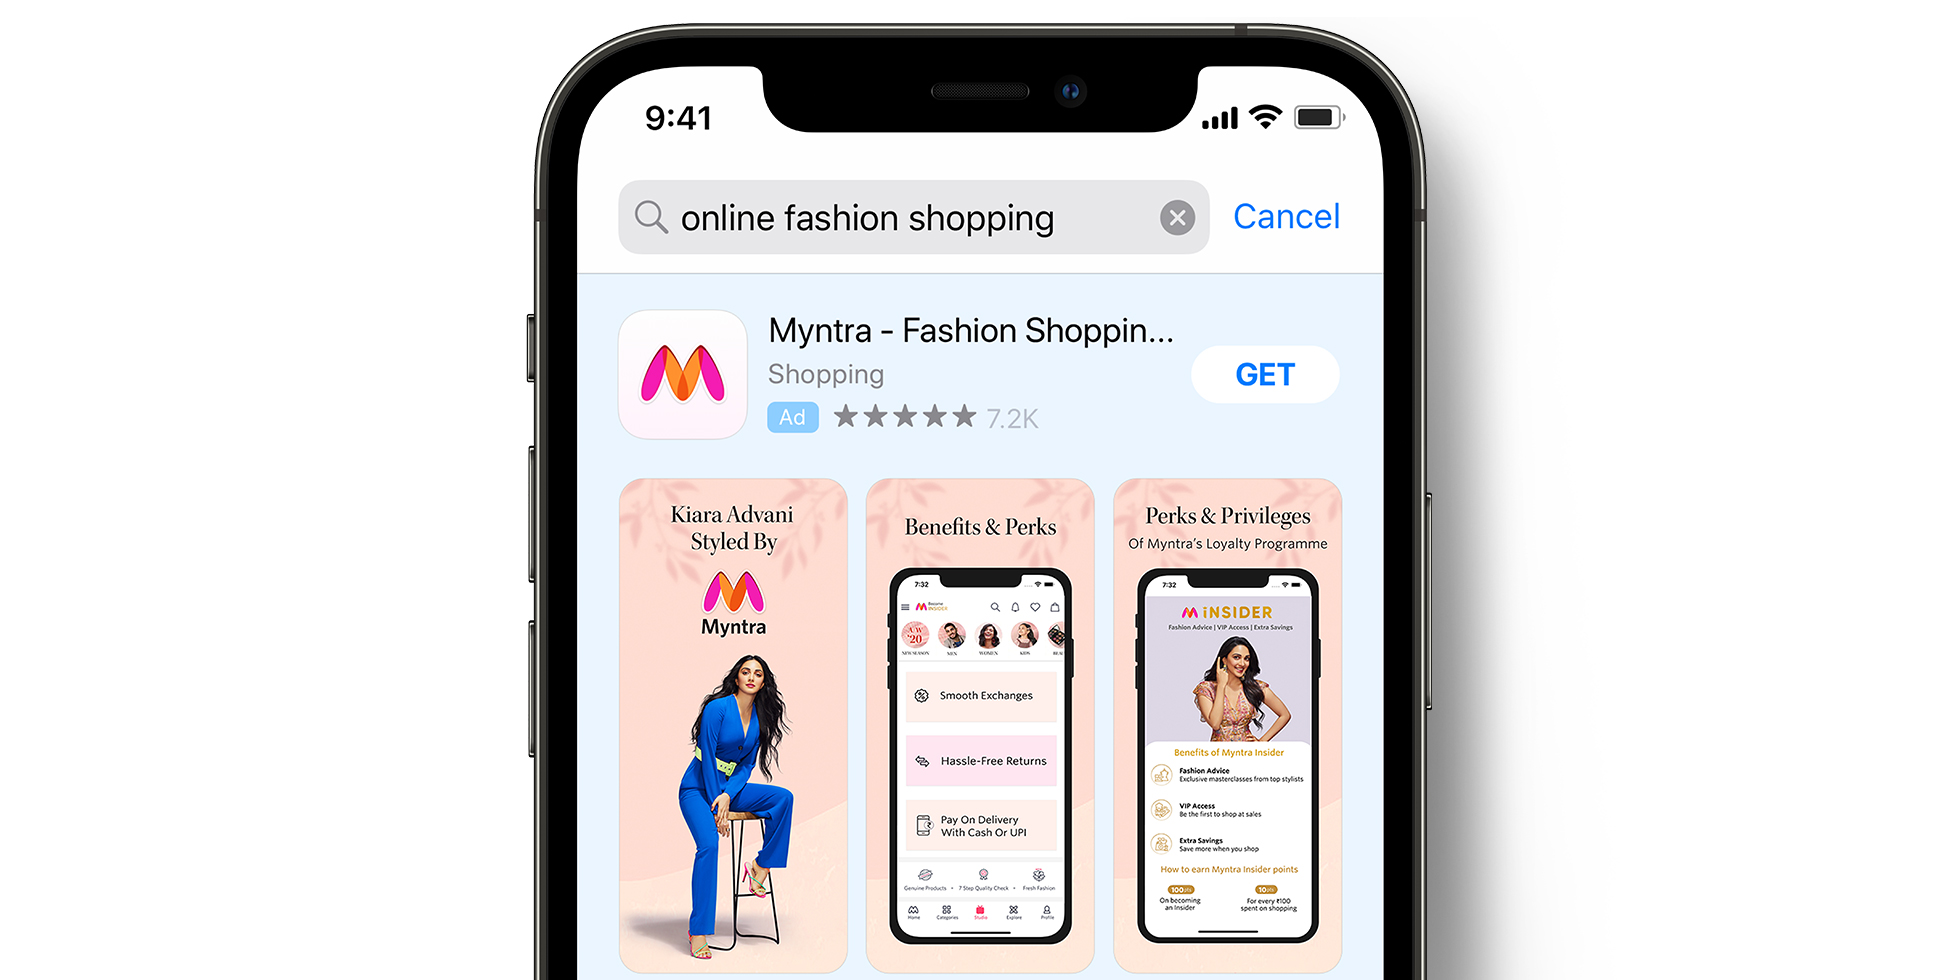 Myntra ad on the App Store 